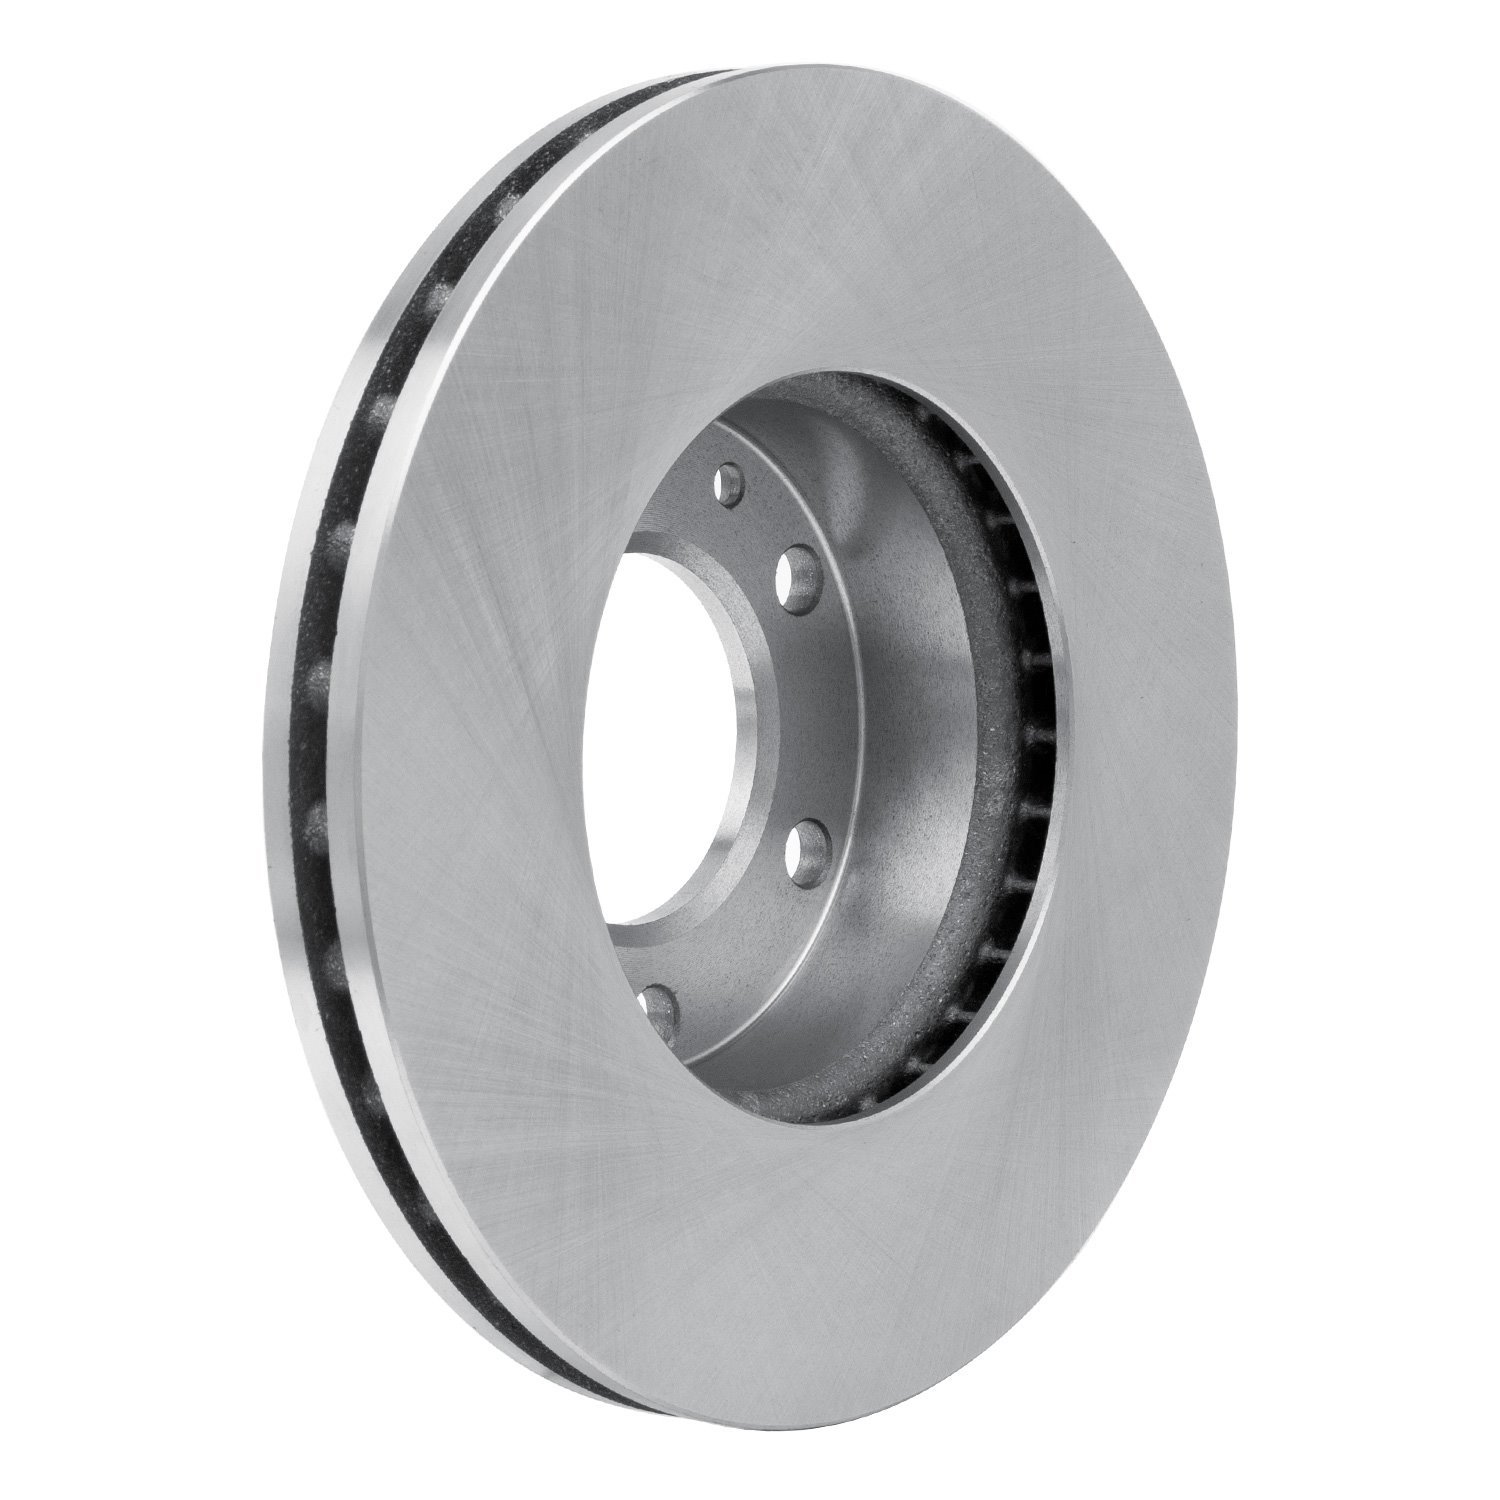 E-Line Blank Brake Rotor, Fits Select Fits Multiple Makes/Models, Position: Front